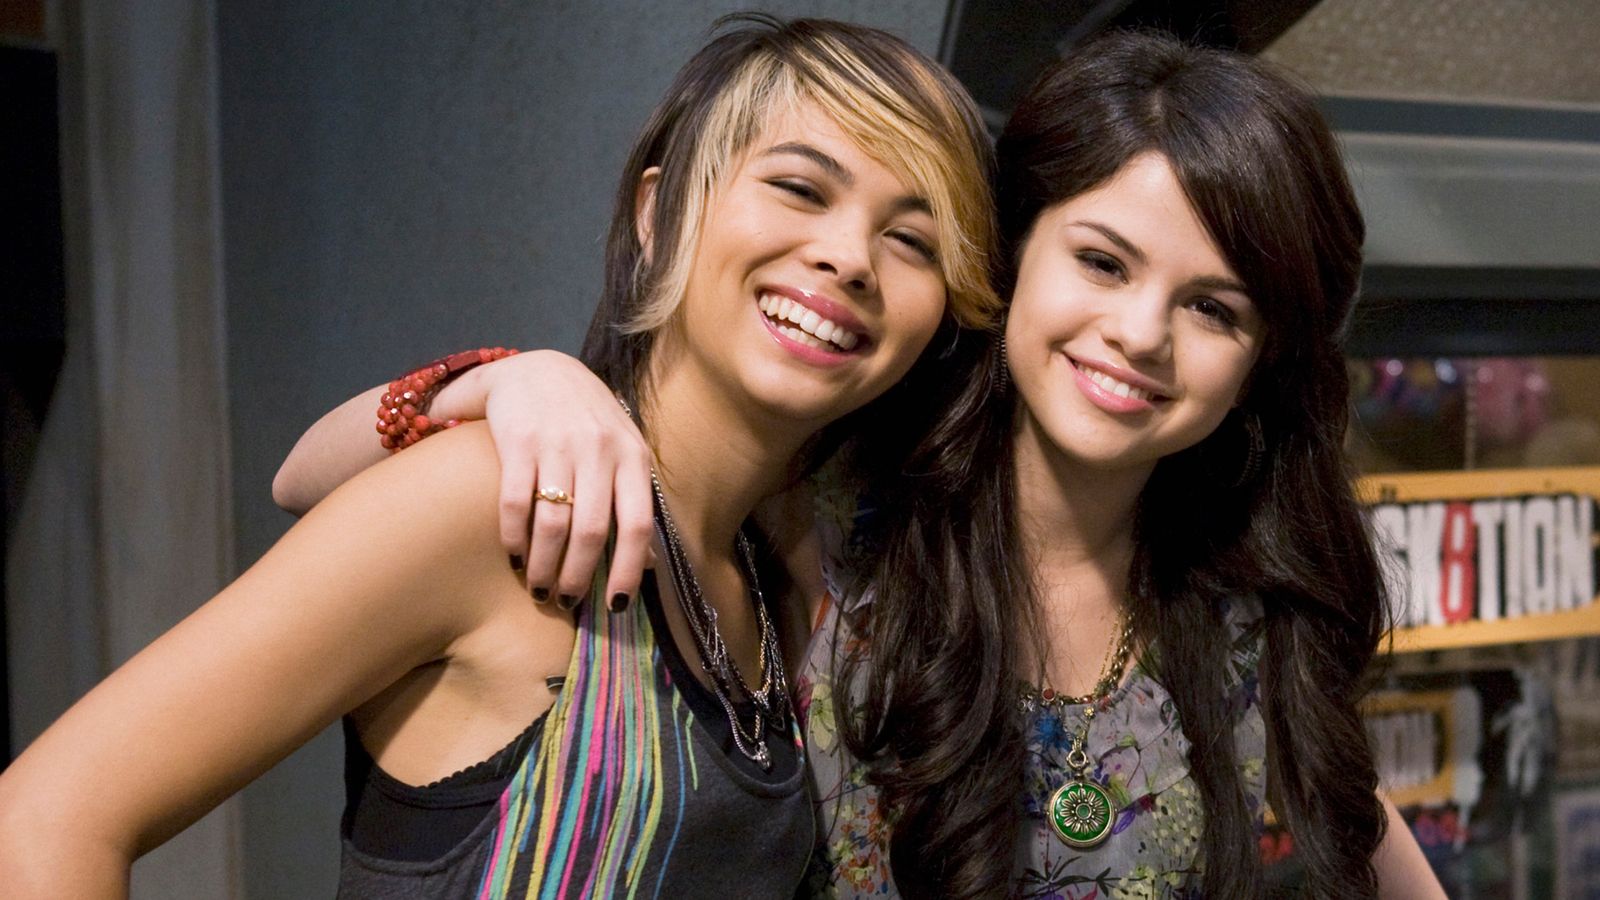 Selena Gomez's Wizards Of Waverly Place character was meant to be bisexual, producer reveals